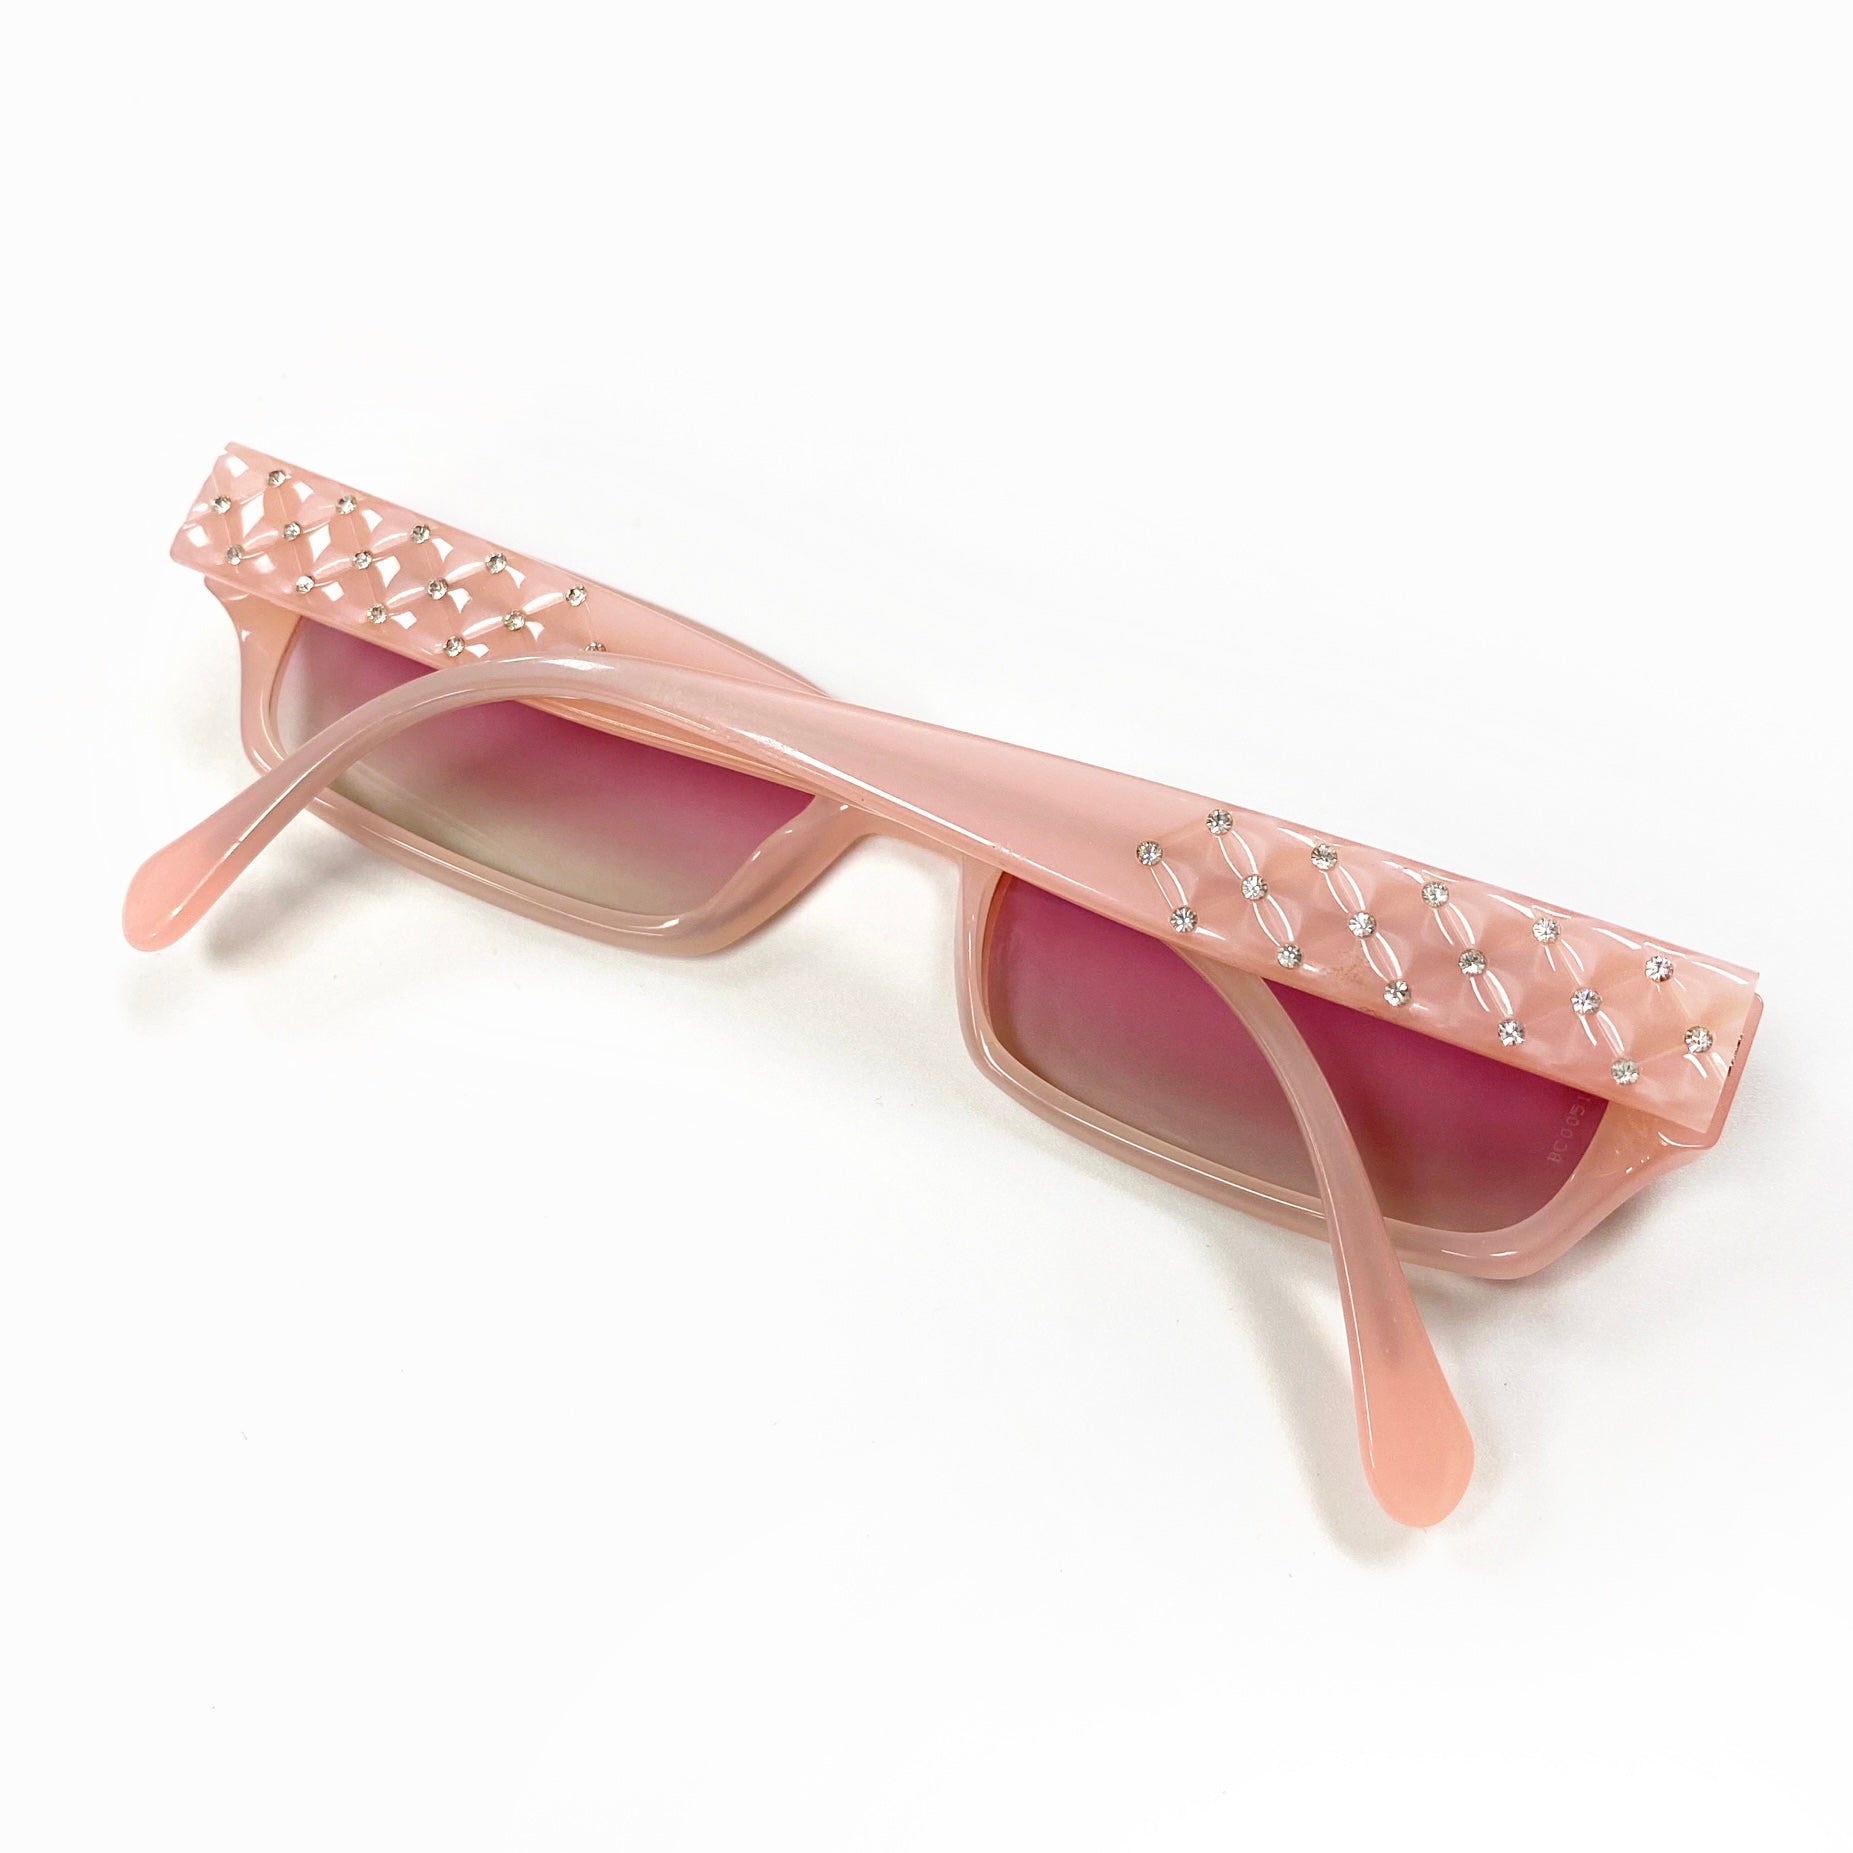 CHANEL, Accessories, Chanel Vintage Sunglasses Crystal Ccs